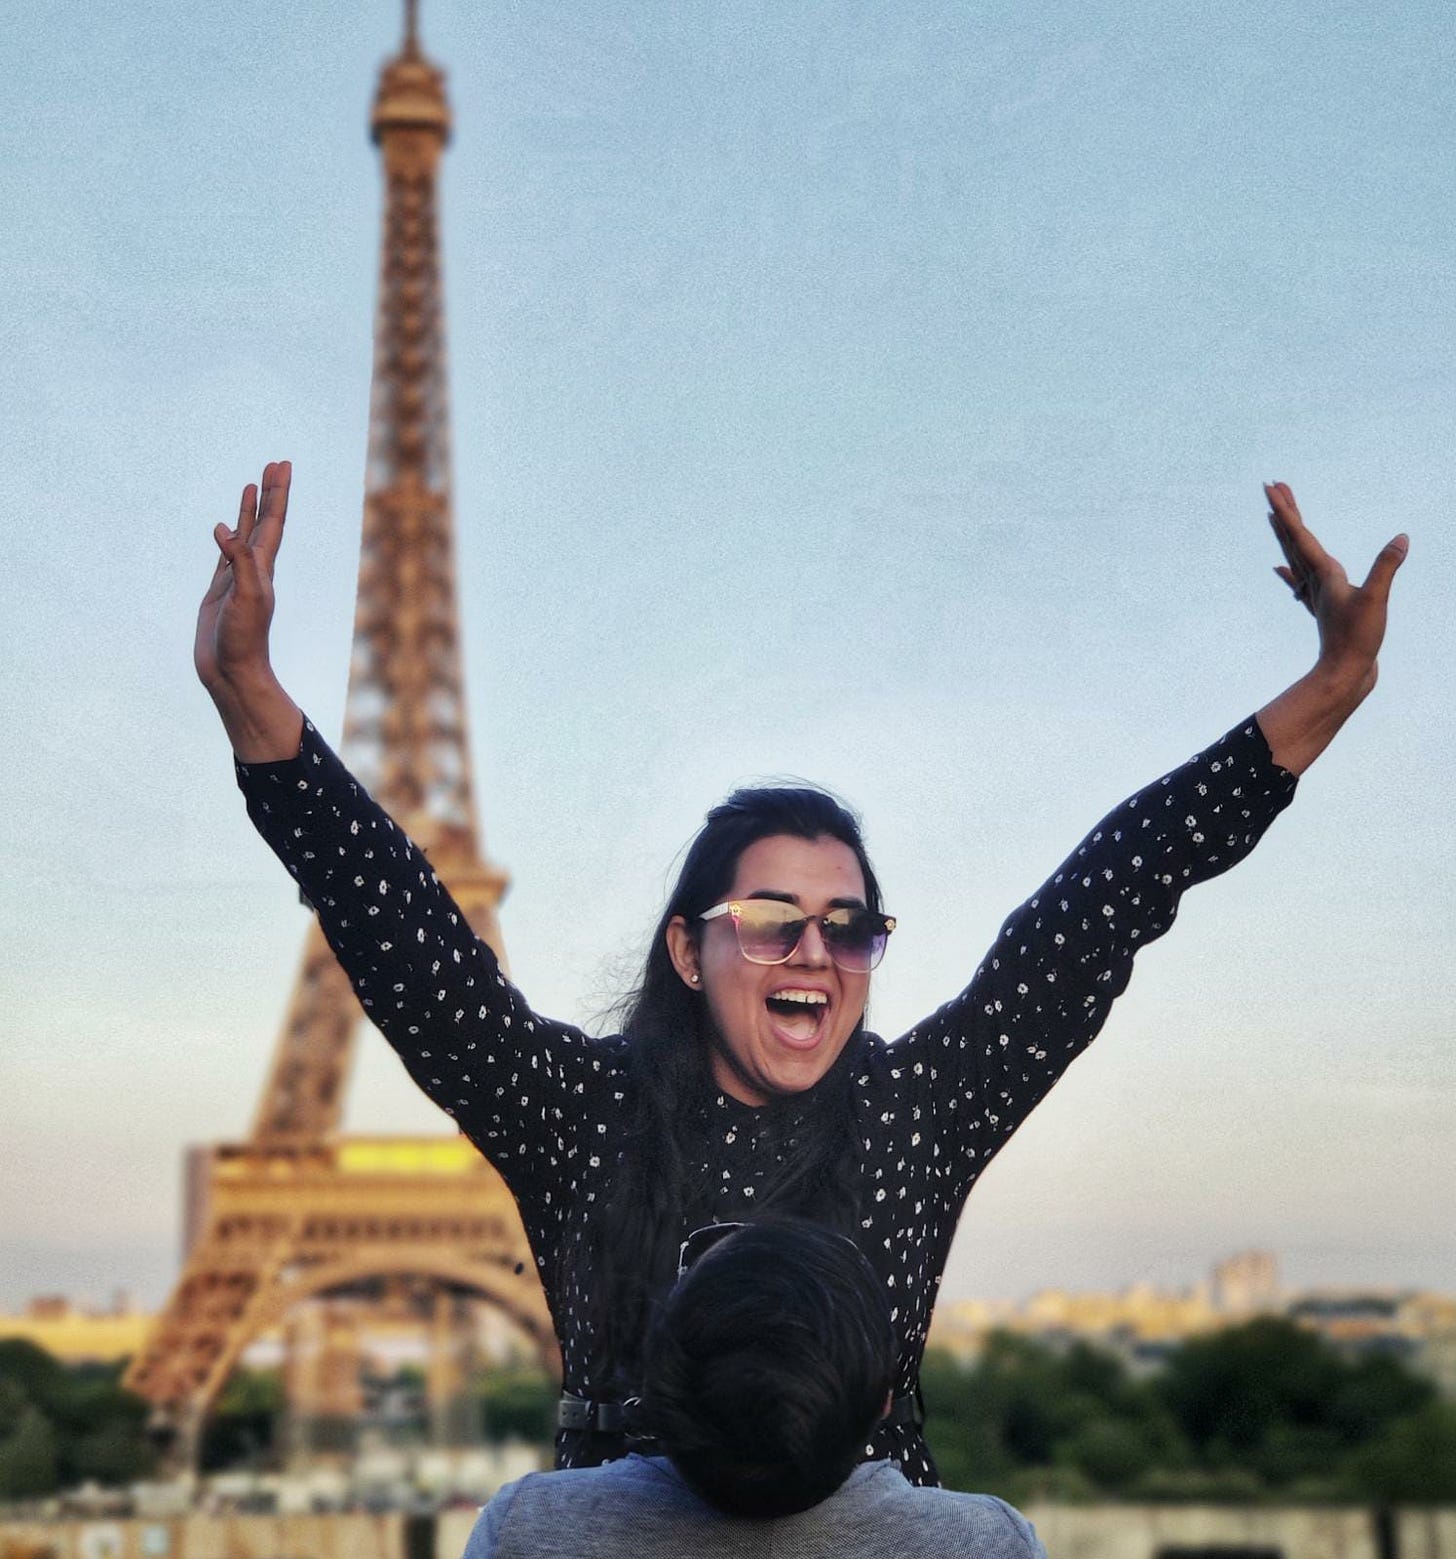 This is us in front of the Eiffel Tower! (Credits: Author’s own image)